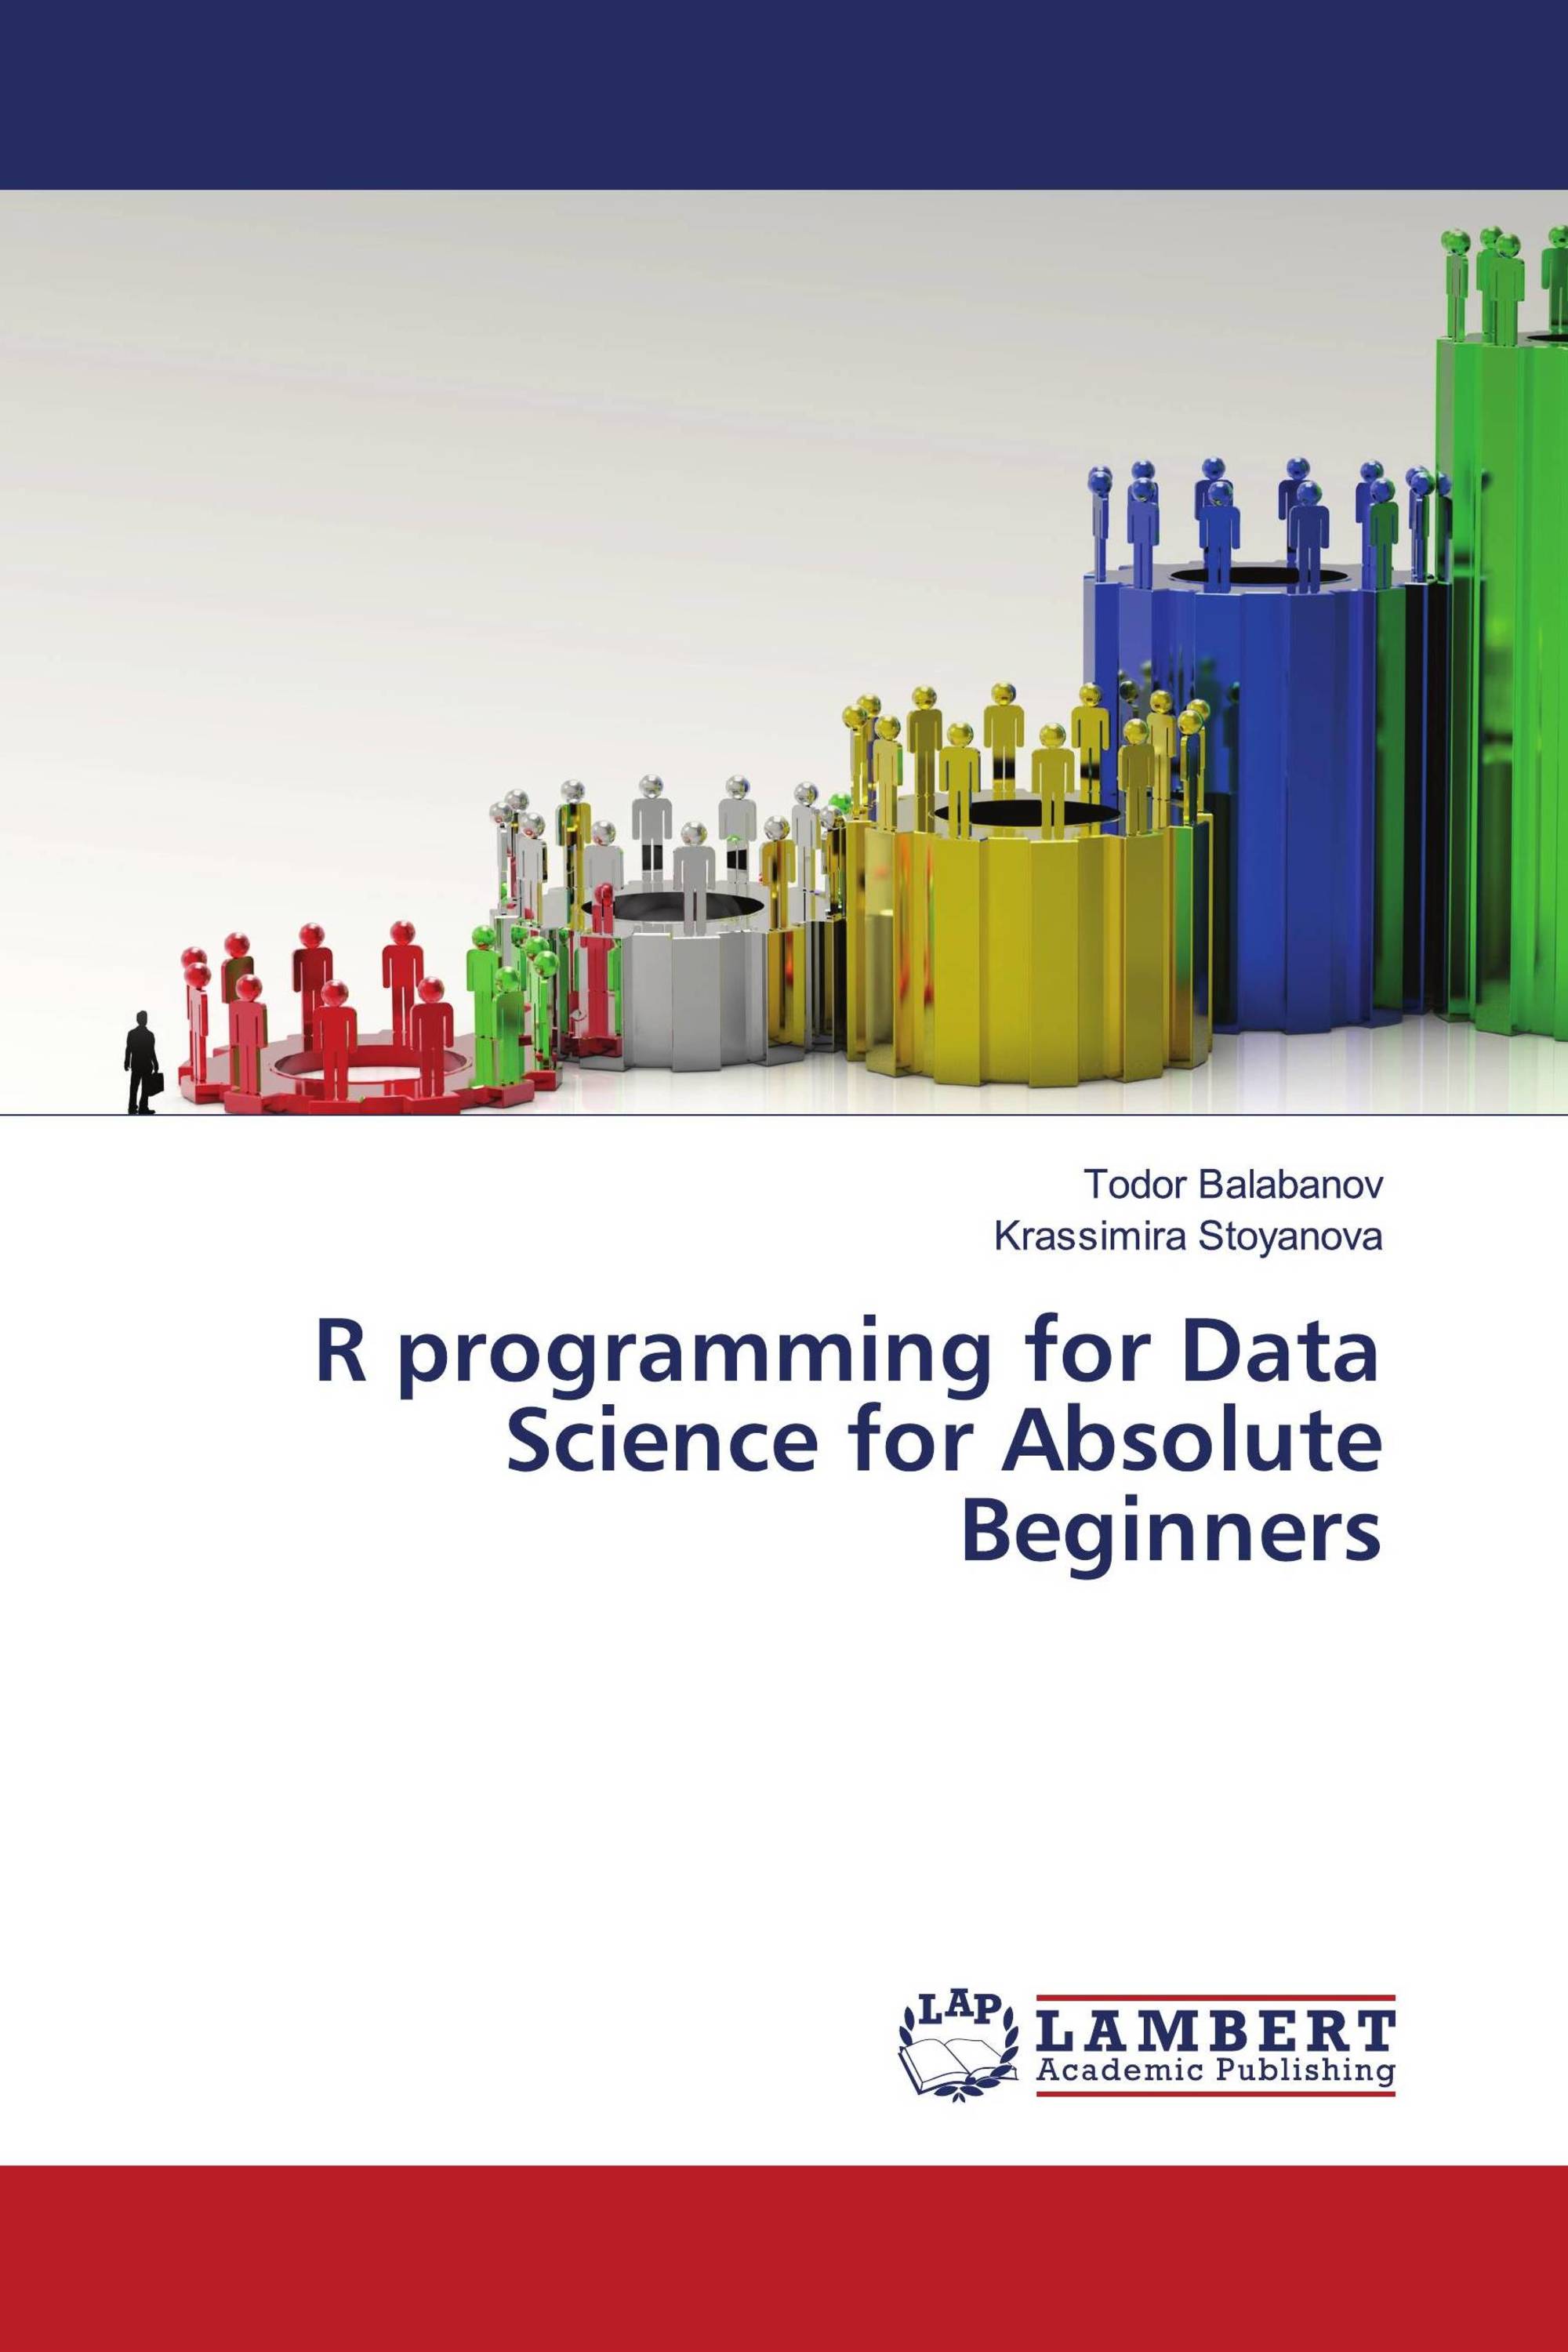 R programming for Data Science for Absolute Beginners